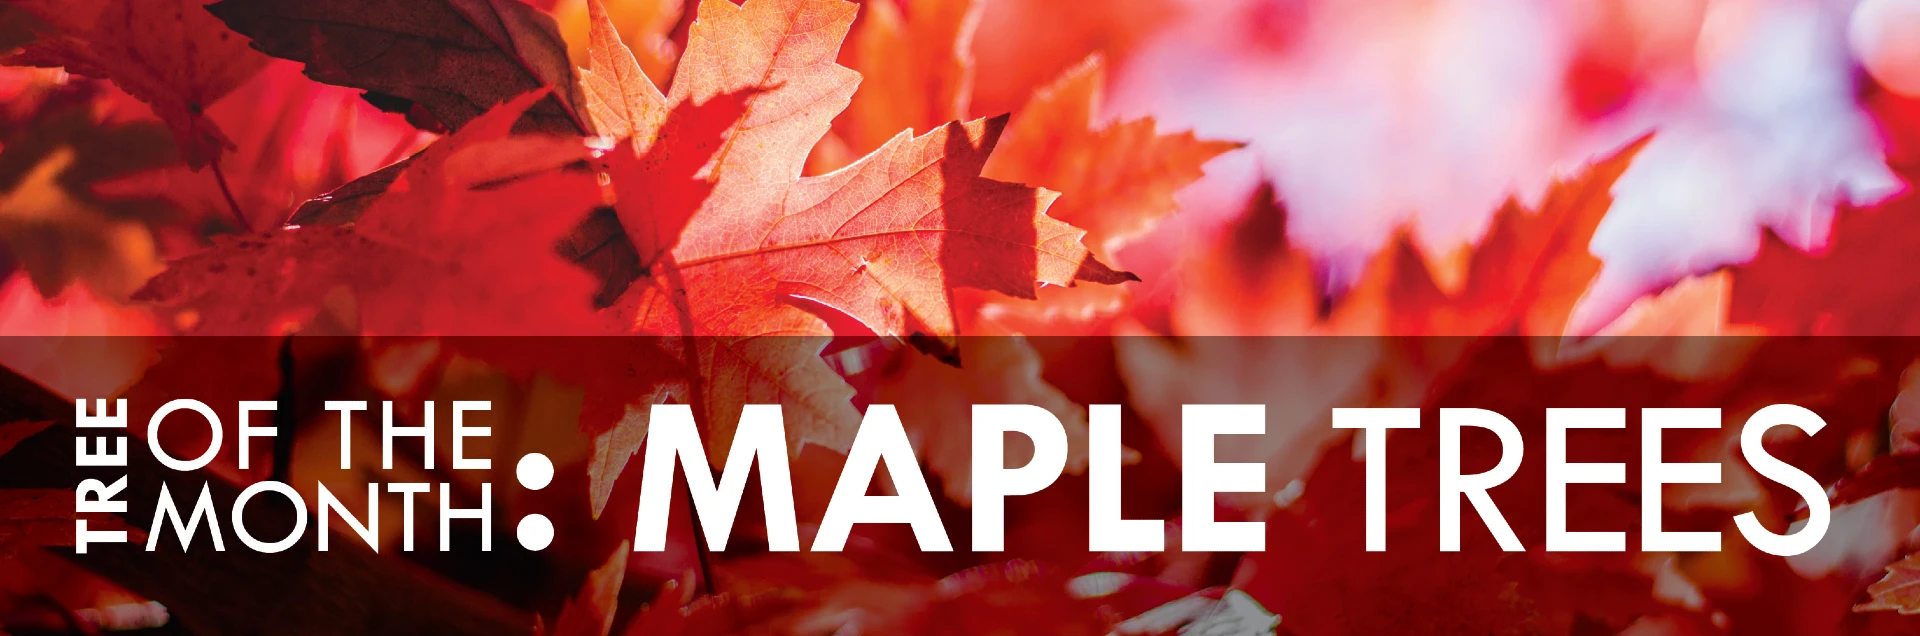 Maple tree leaves with text that reads, "Tree of the Month: Maple"